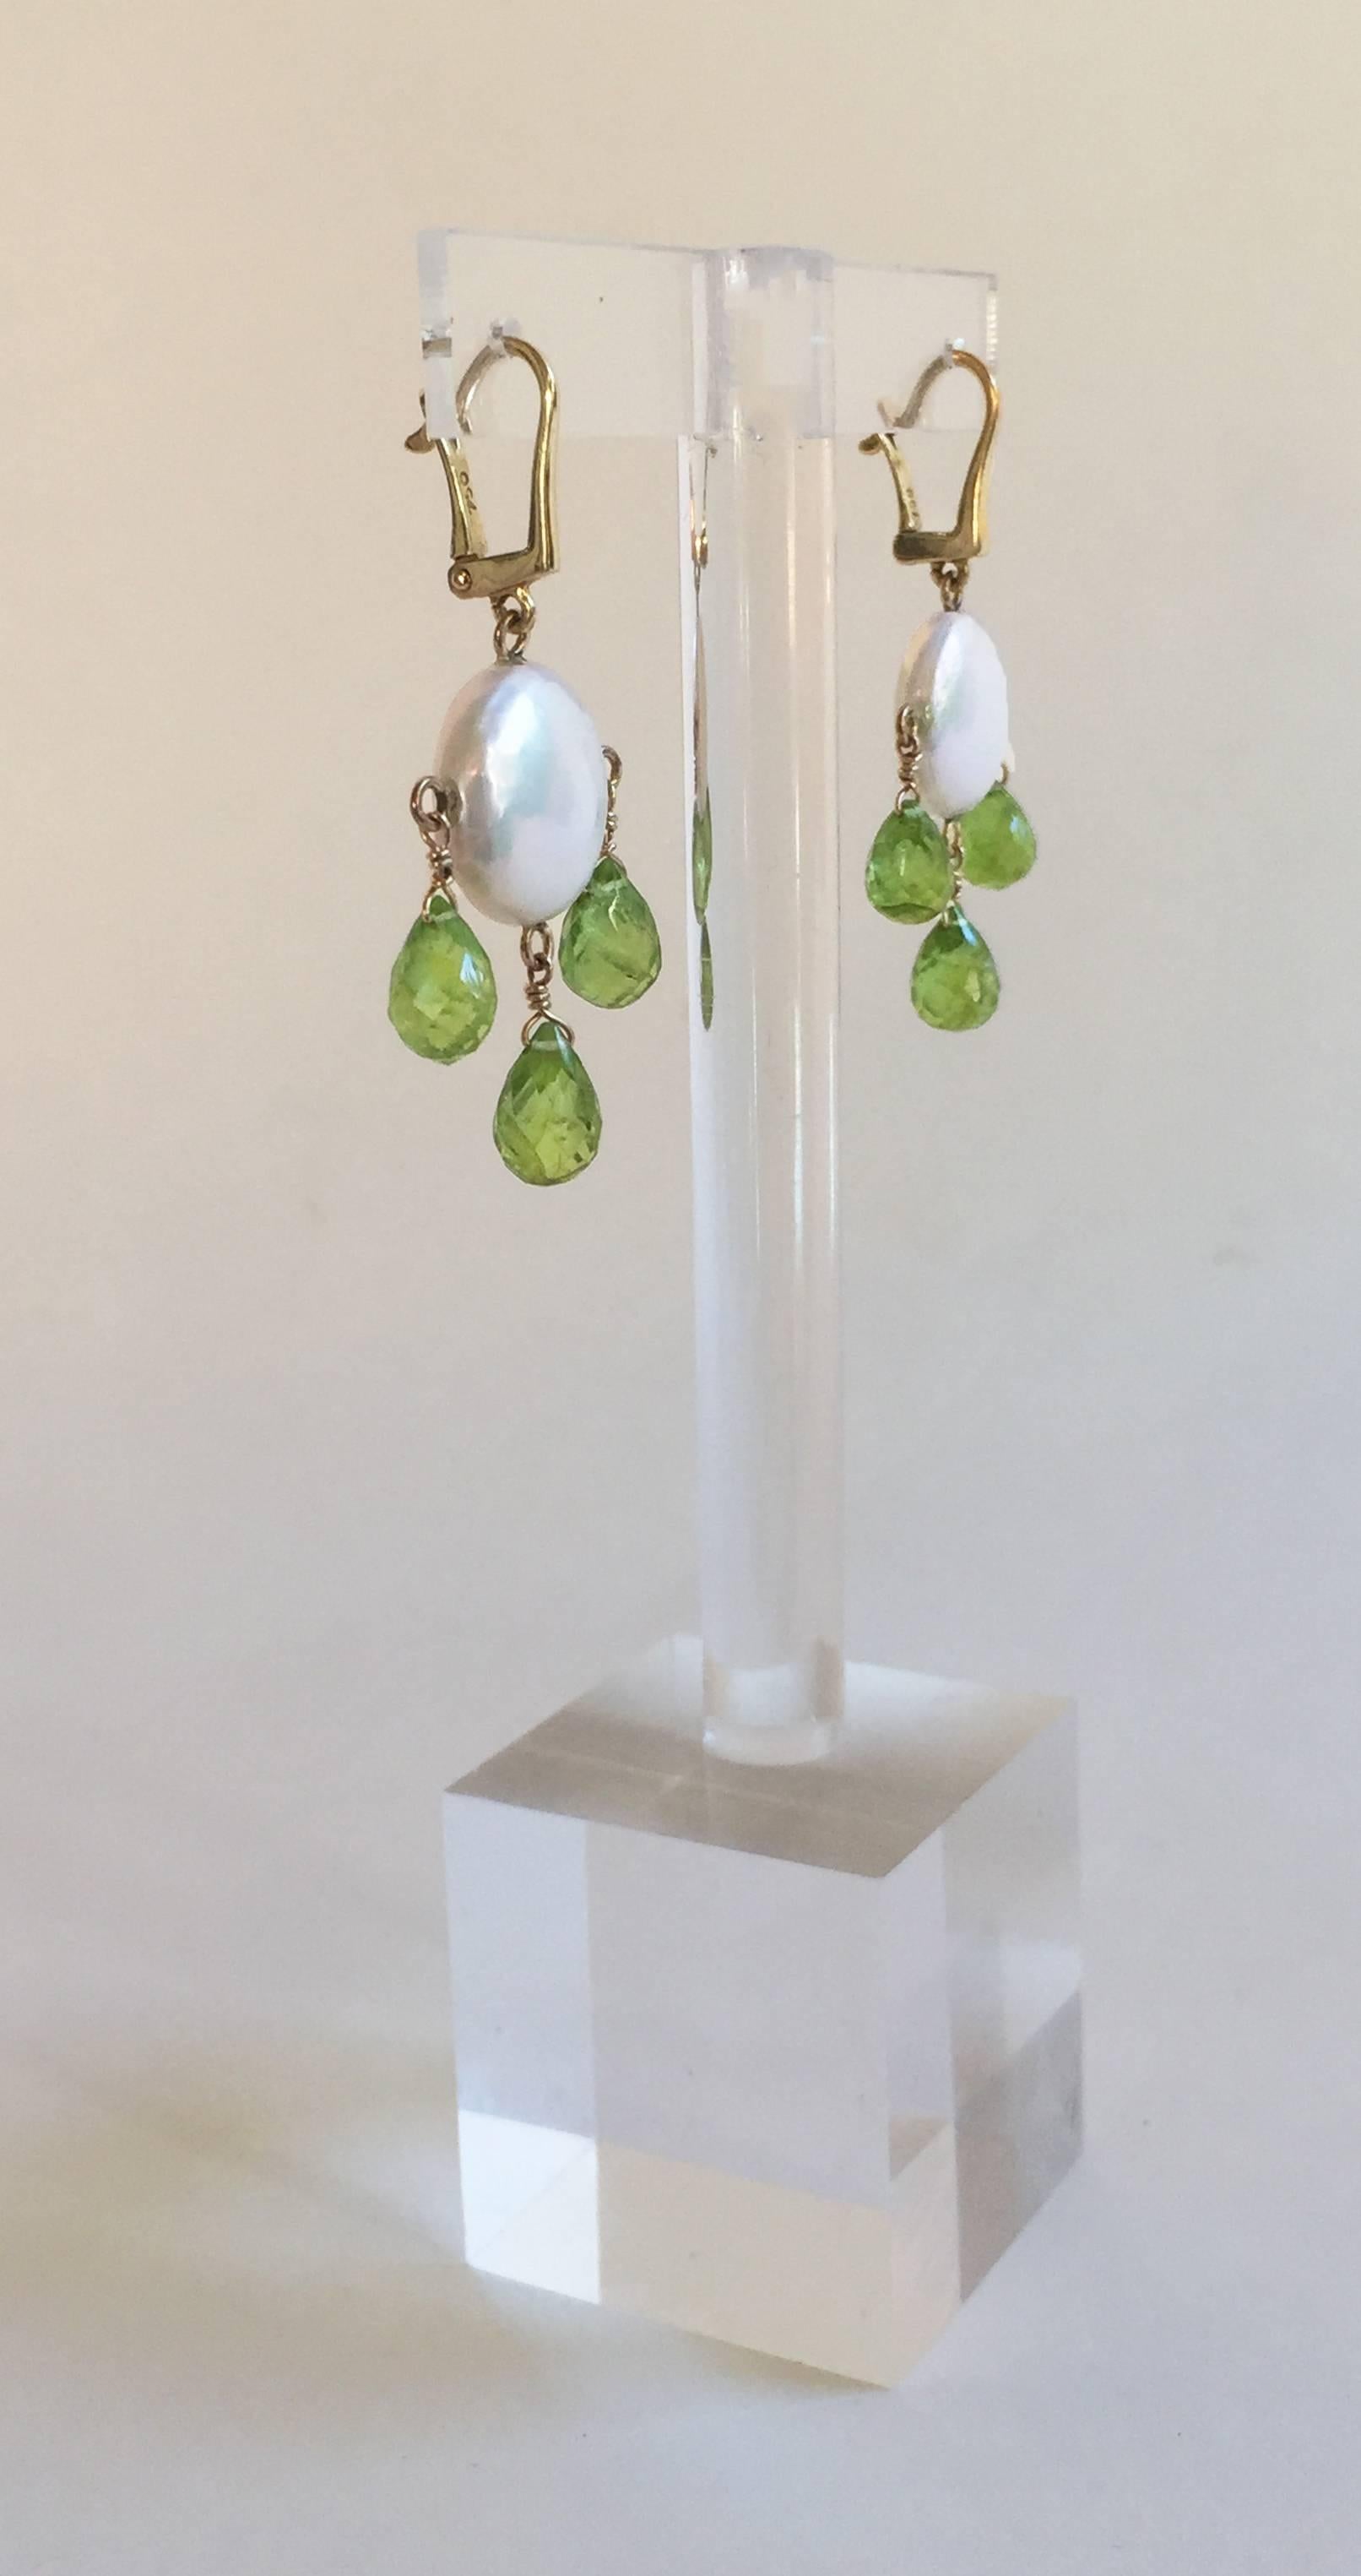 Sensual and playful coin pearl are accented by brilliant light green Peridot briolettes. The earrings measure at 1 3/4 inches. With 14k yellow gold findings, the earrings become more elegant and whimsical .